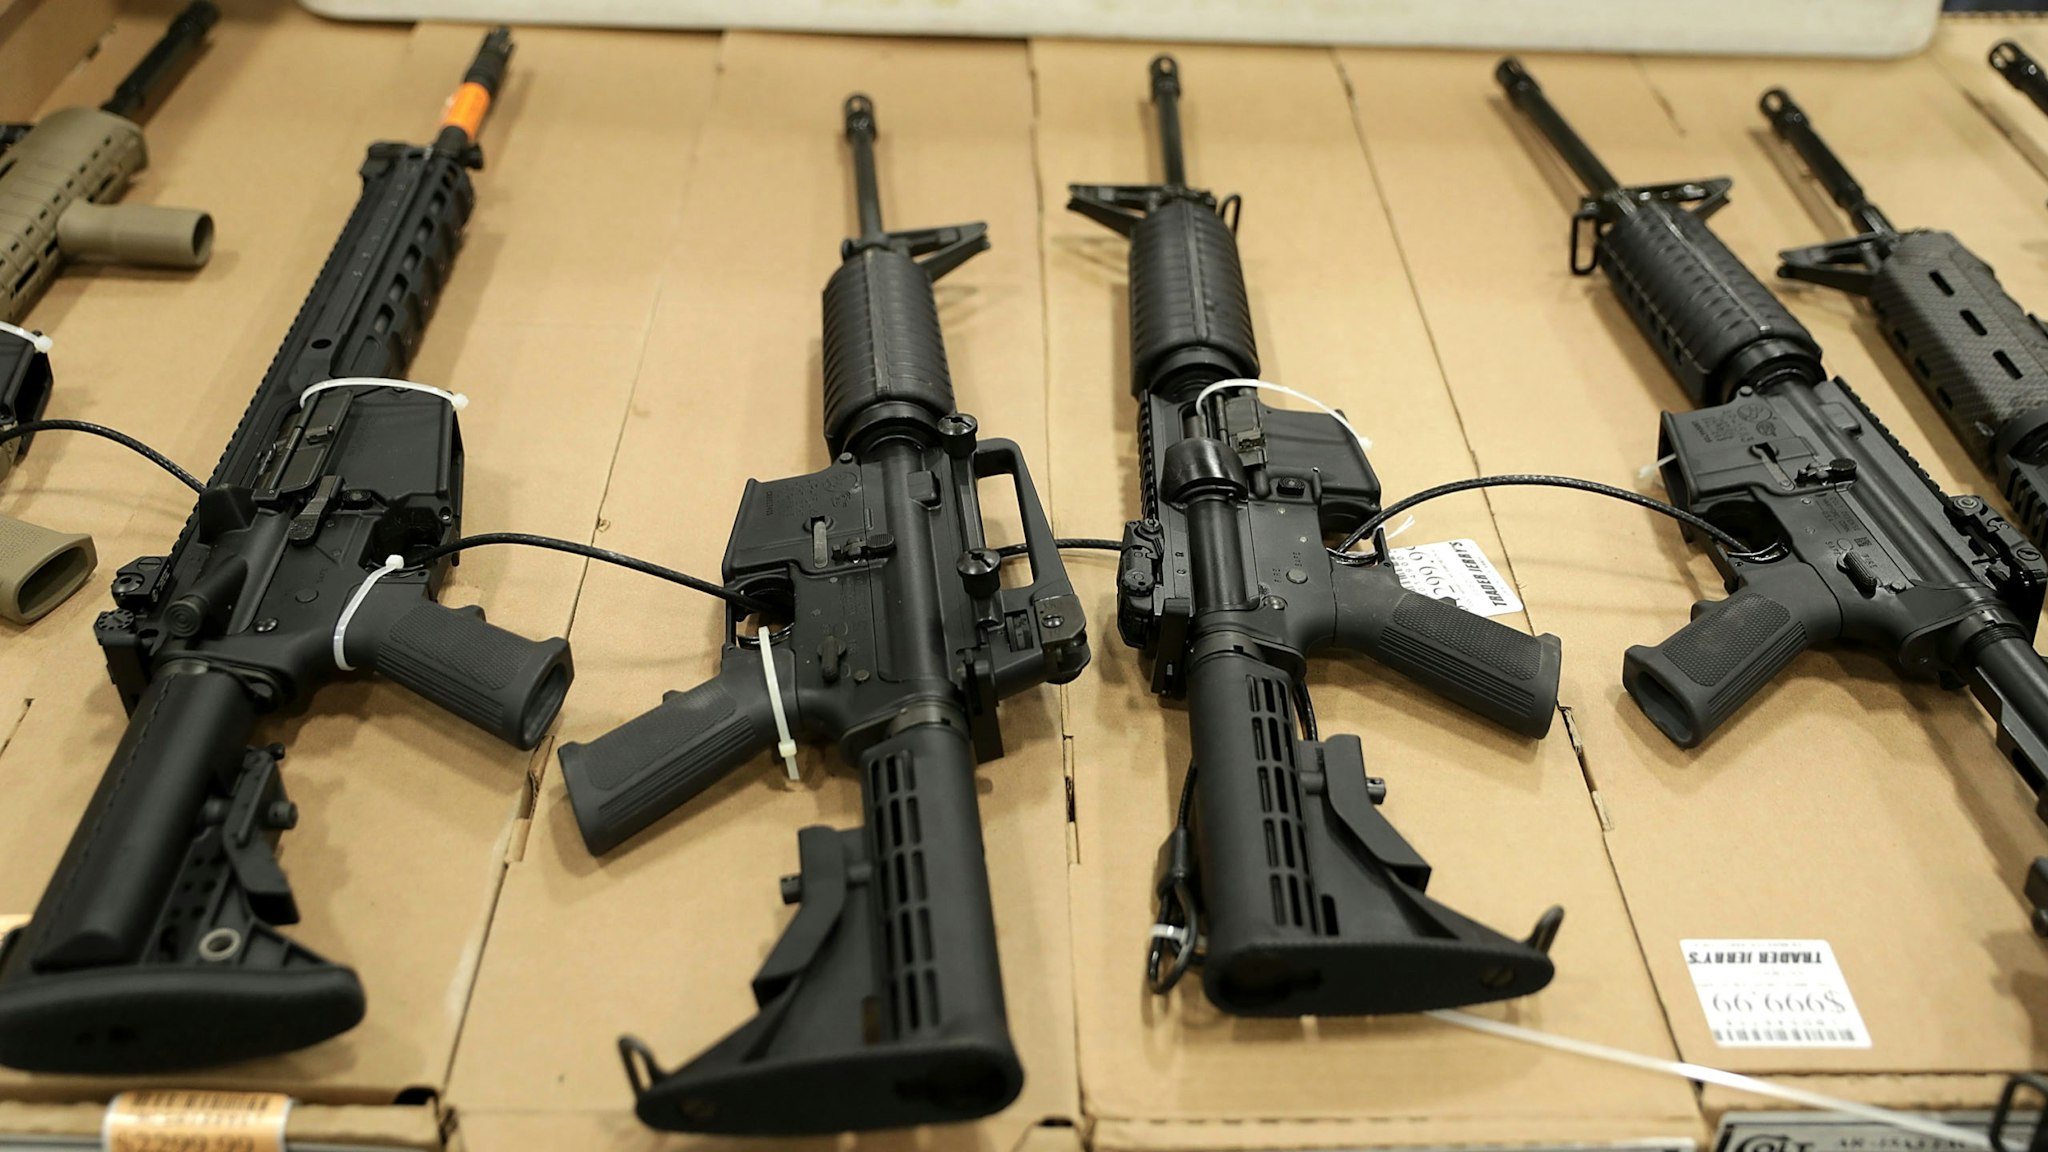 CHANTILLY, VA - NOVEMBER 18: Guns are on display during the Nation's Gun Show on November 18, 2016 at Dulles Expo Center in Chantilly, Virginia. The show is one of the largest in the area.